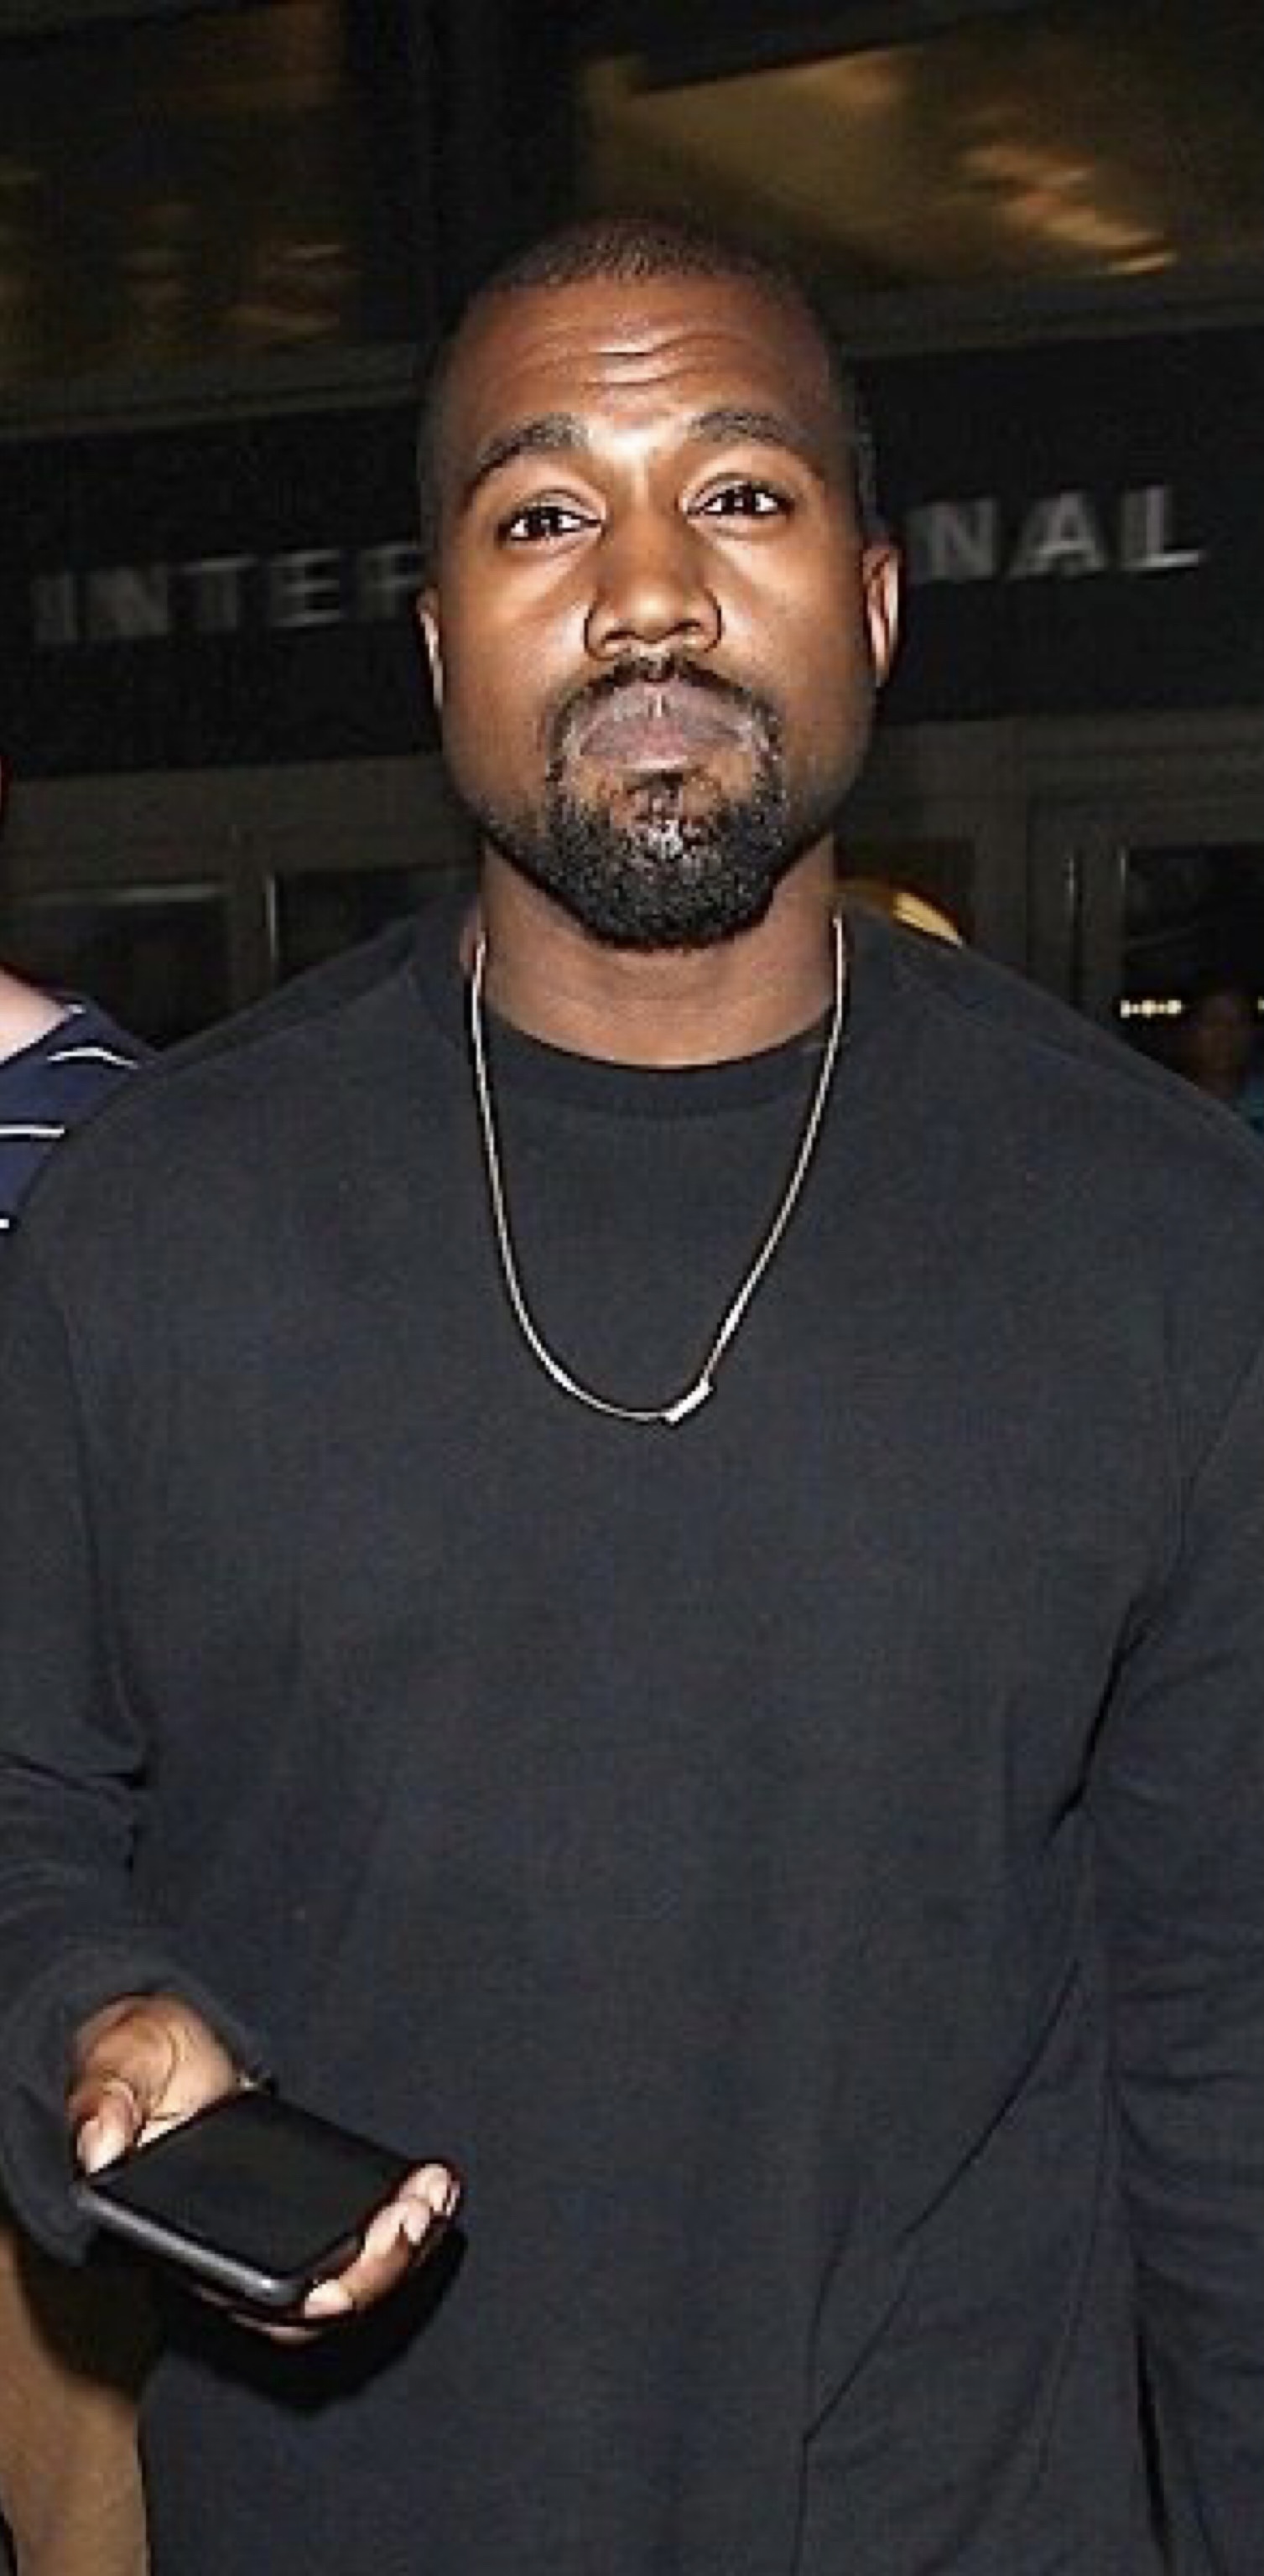 Kanye West 'set to become creative director at Louis Vuitton